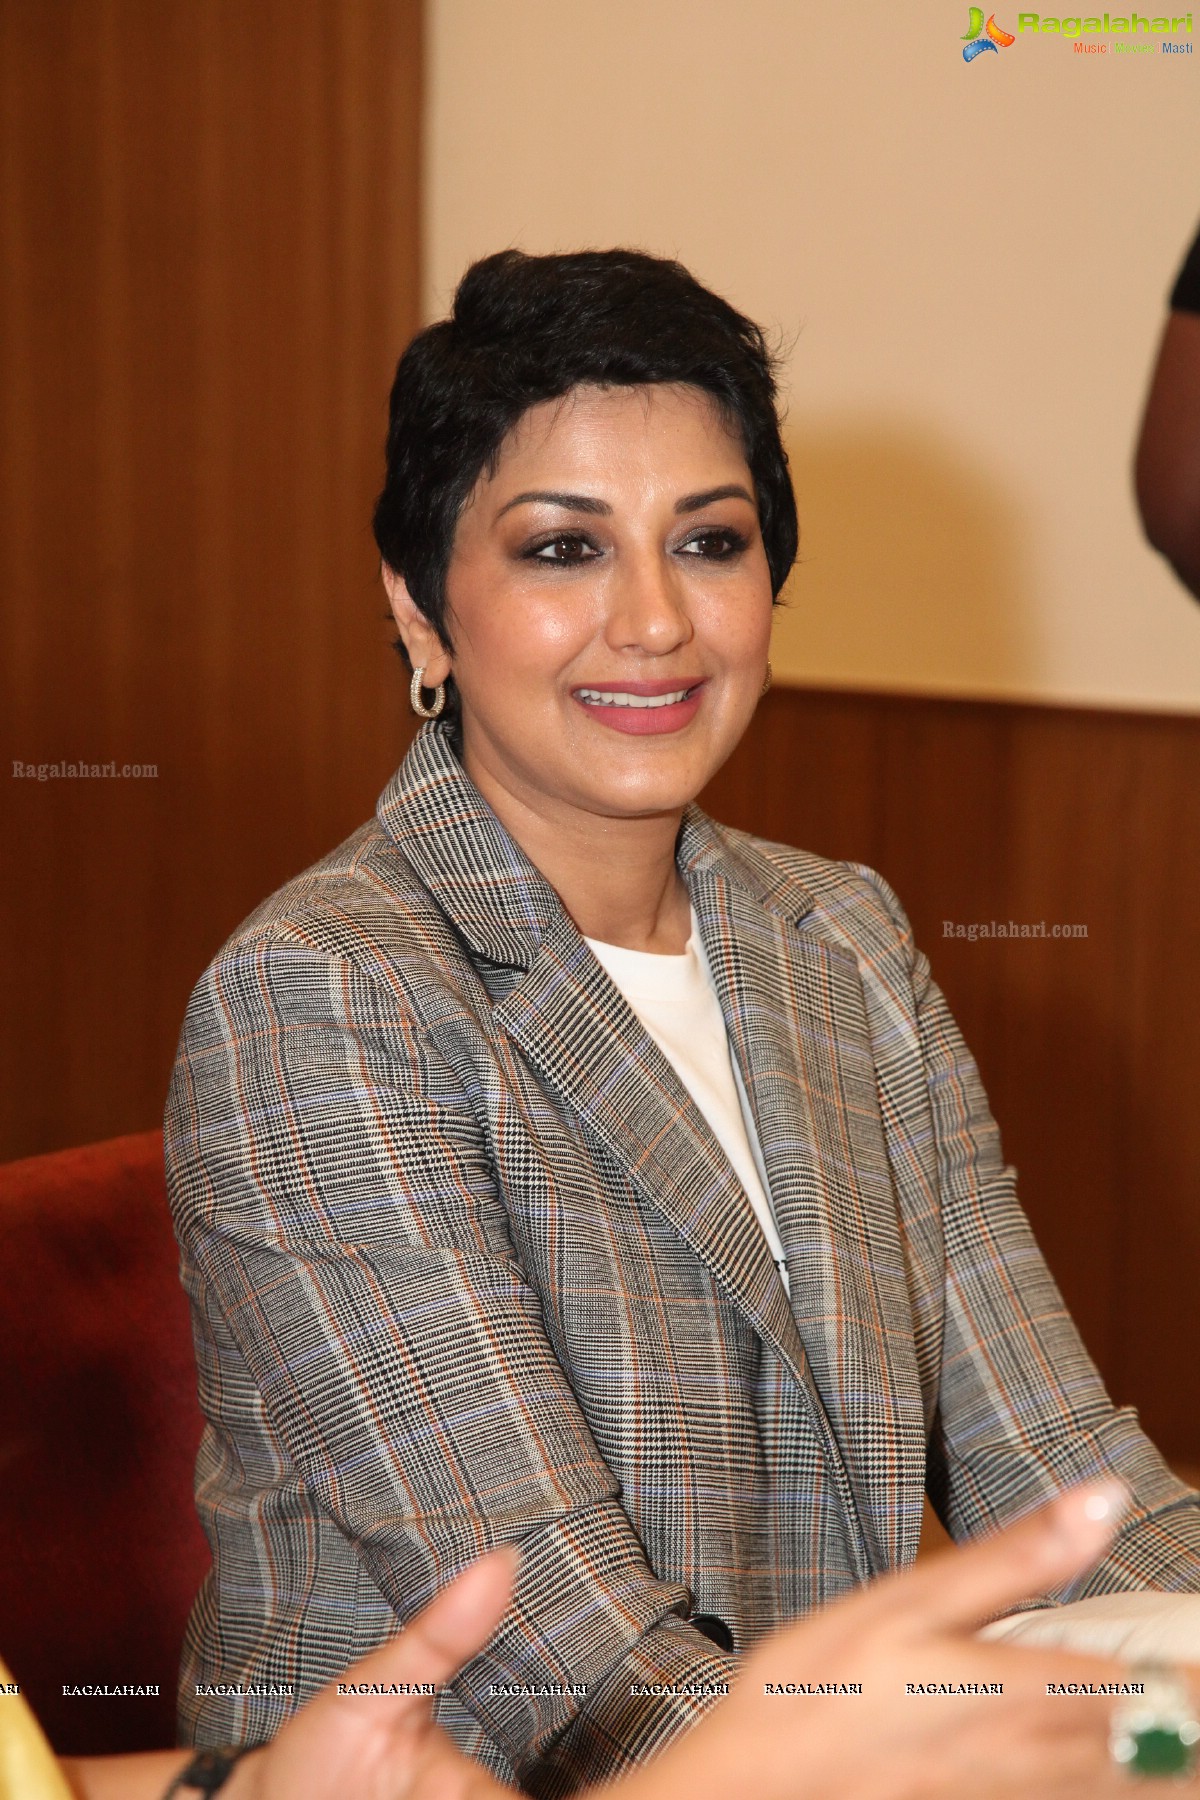 Sonali Bendre Adresses FLO Members on ‘How to turn Positive and Switch on the Sunshine' at Radisson Blue, Banjara Hills